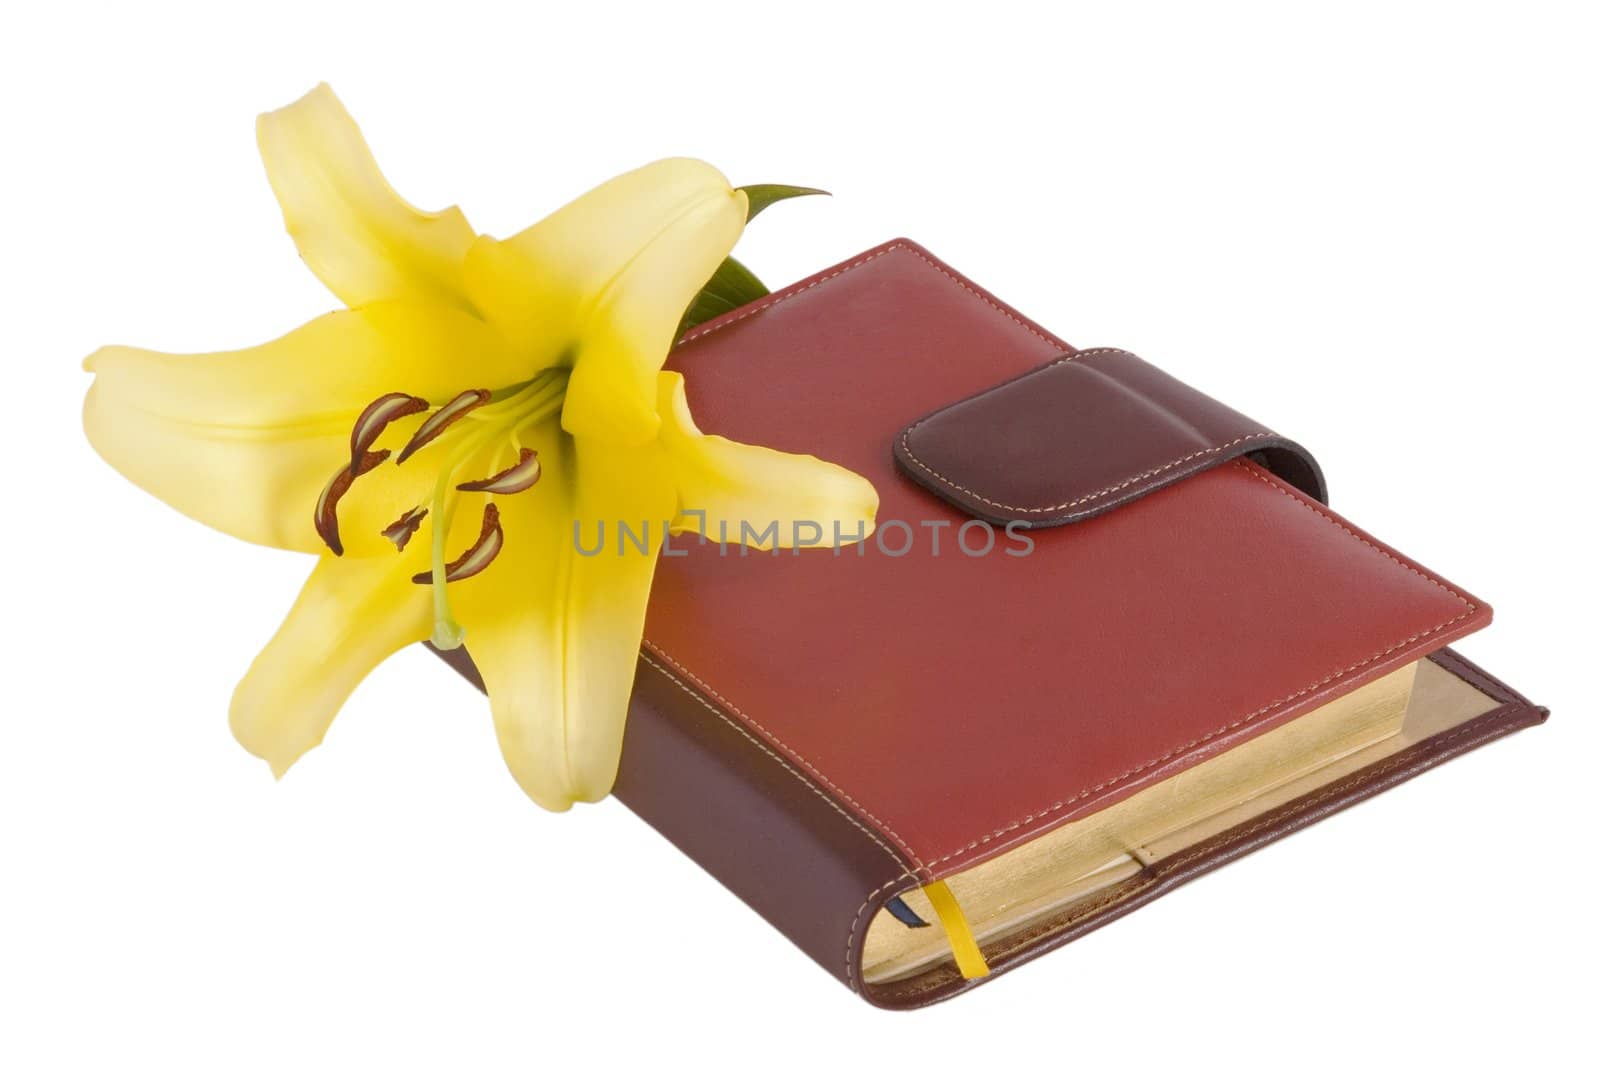 blossom yellow lily flower and red notebook